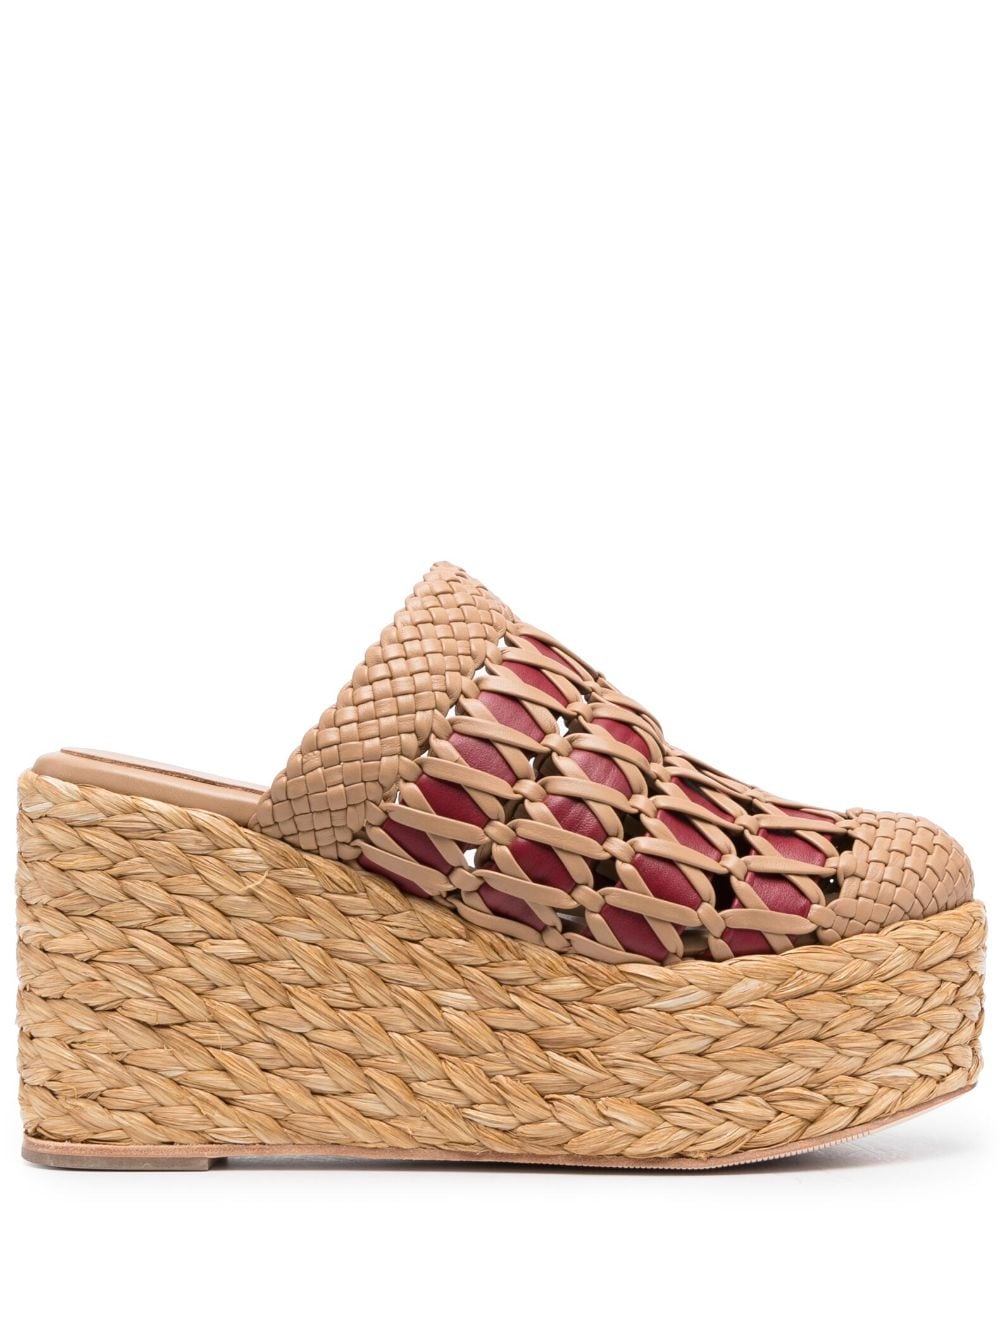 PALOMA BARCELÓ 105MM INTERWOVEN WEDGE MULES